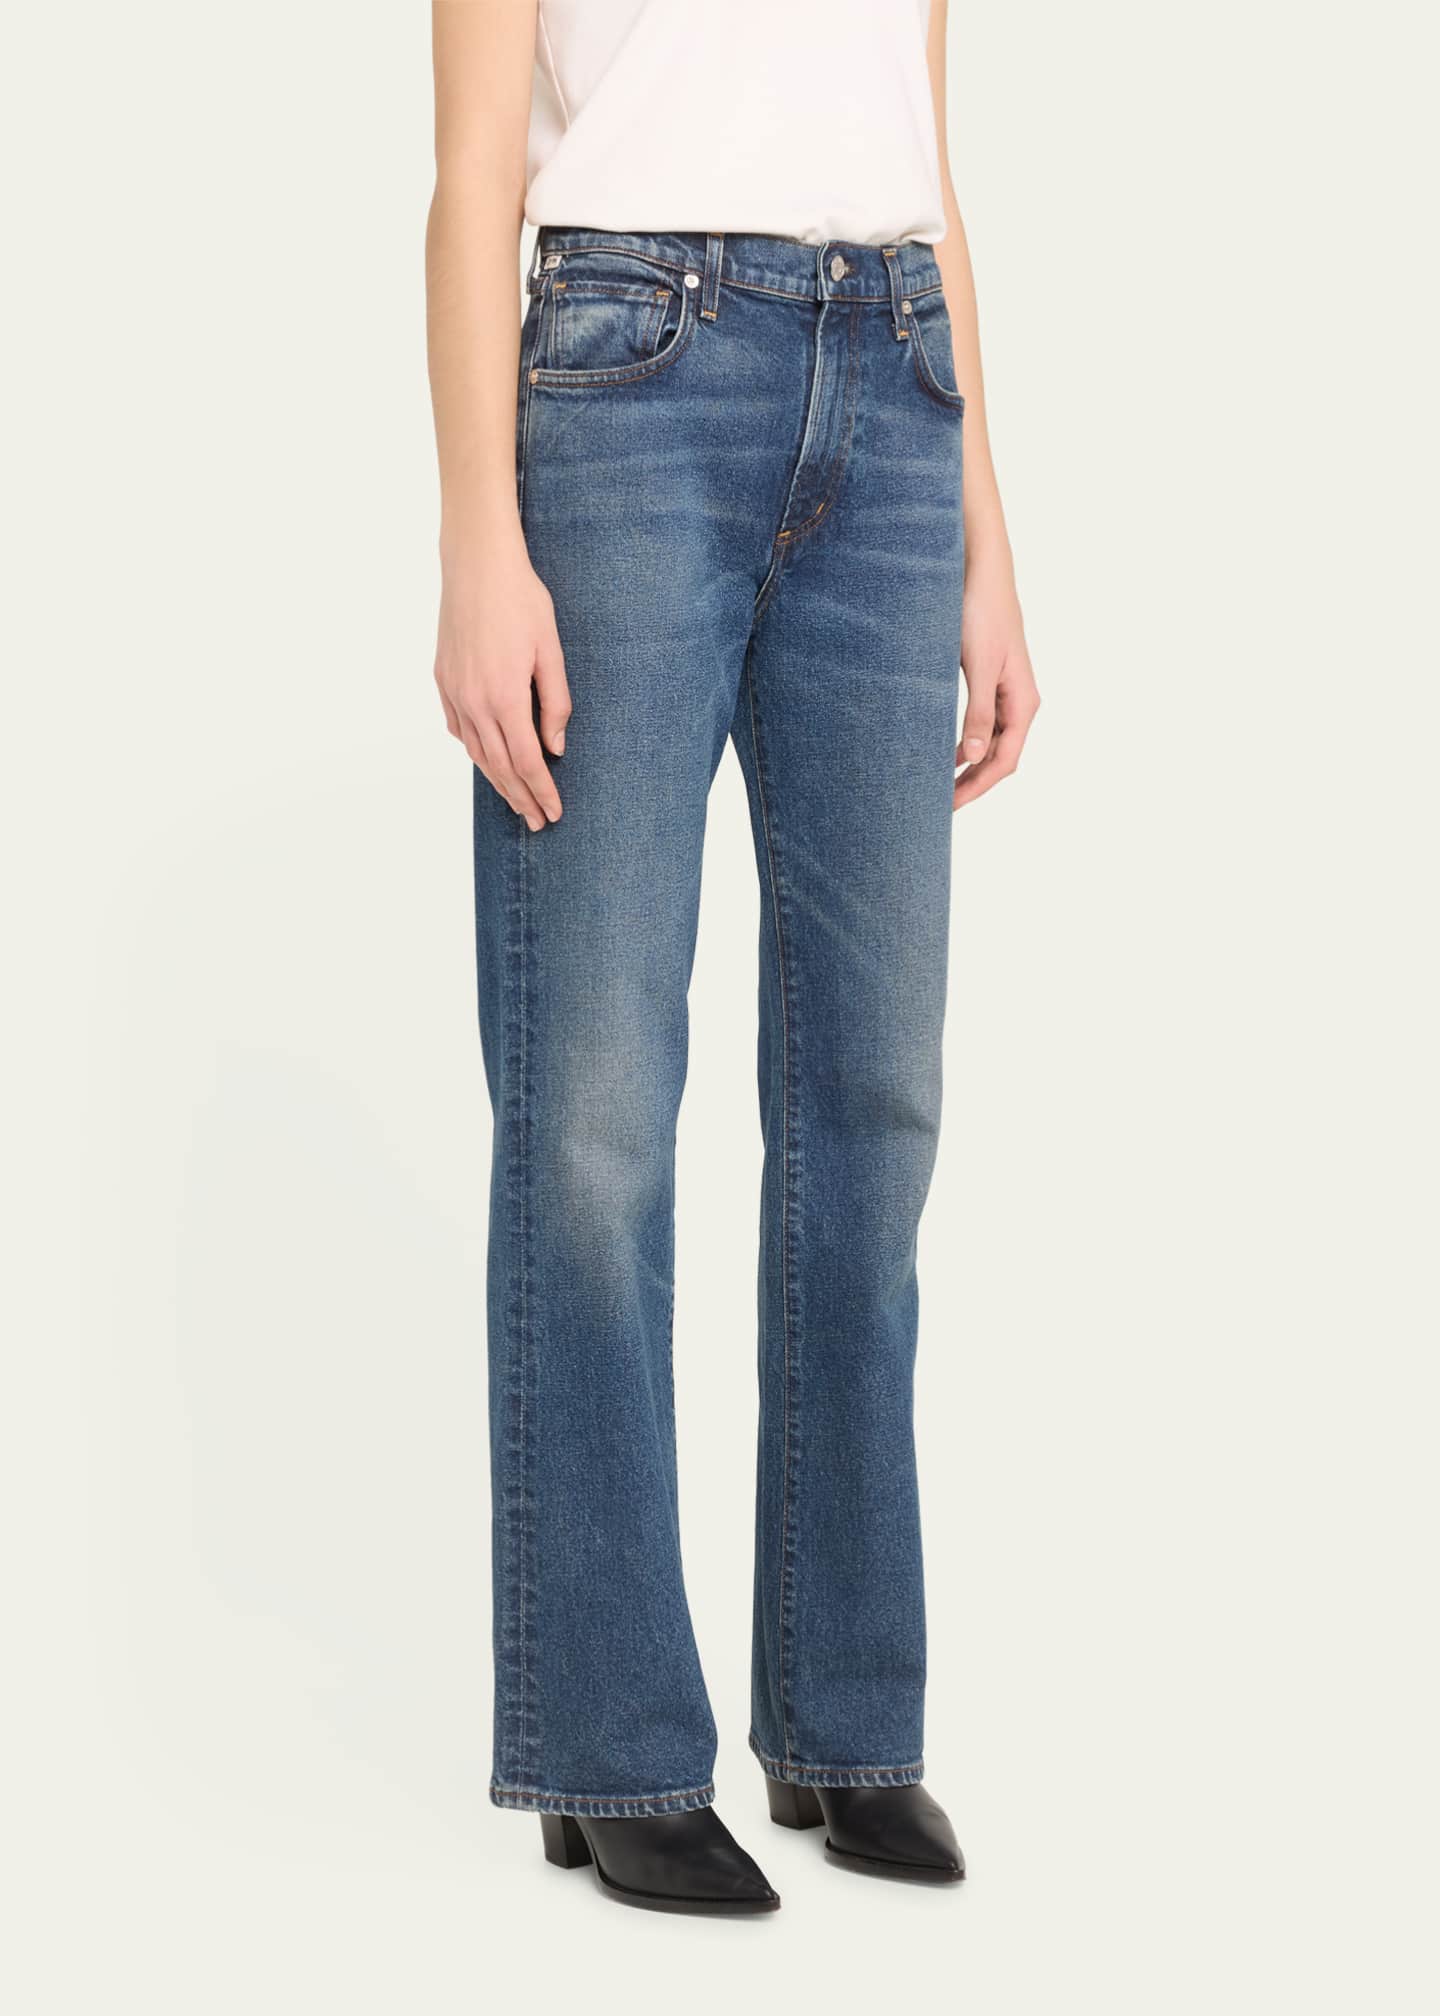 Citizens of Humanity Vidia Mid-Rise Bootcut Jeans - Bergdorf Goodman